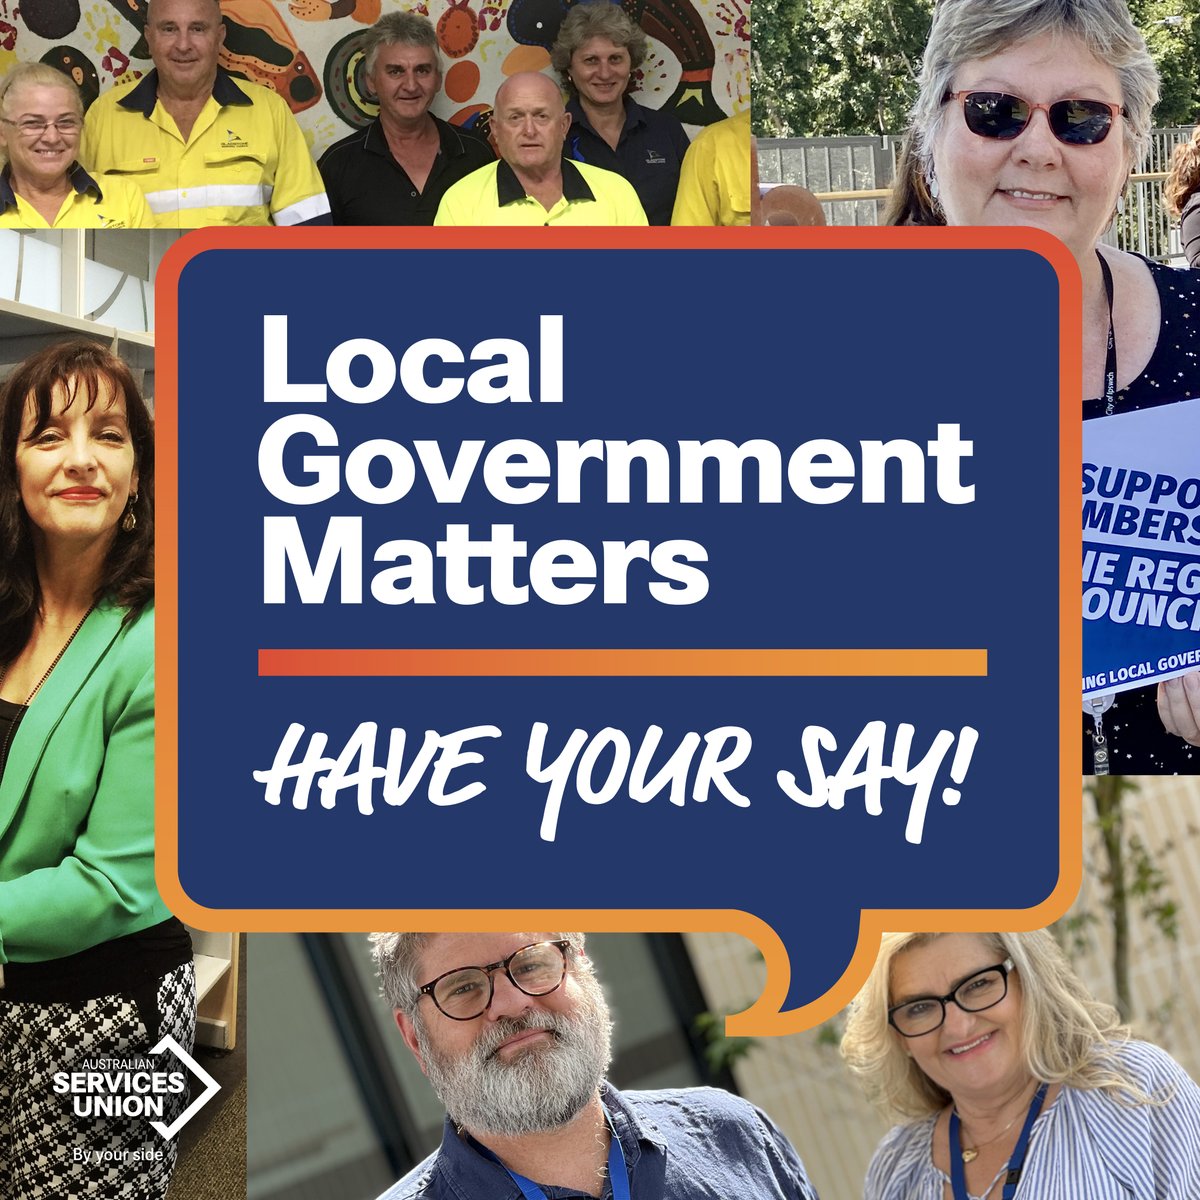 Don't miss this opportunity to have your say - we need to make sure workers are at the forefront of the upcoming local government inquiry! Take the survey: bit.ly/ASUlocalgovtma…